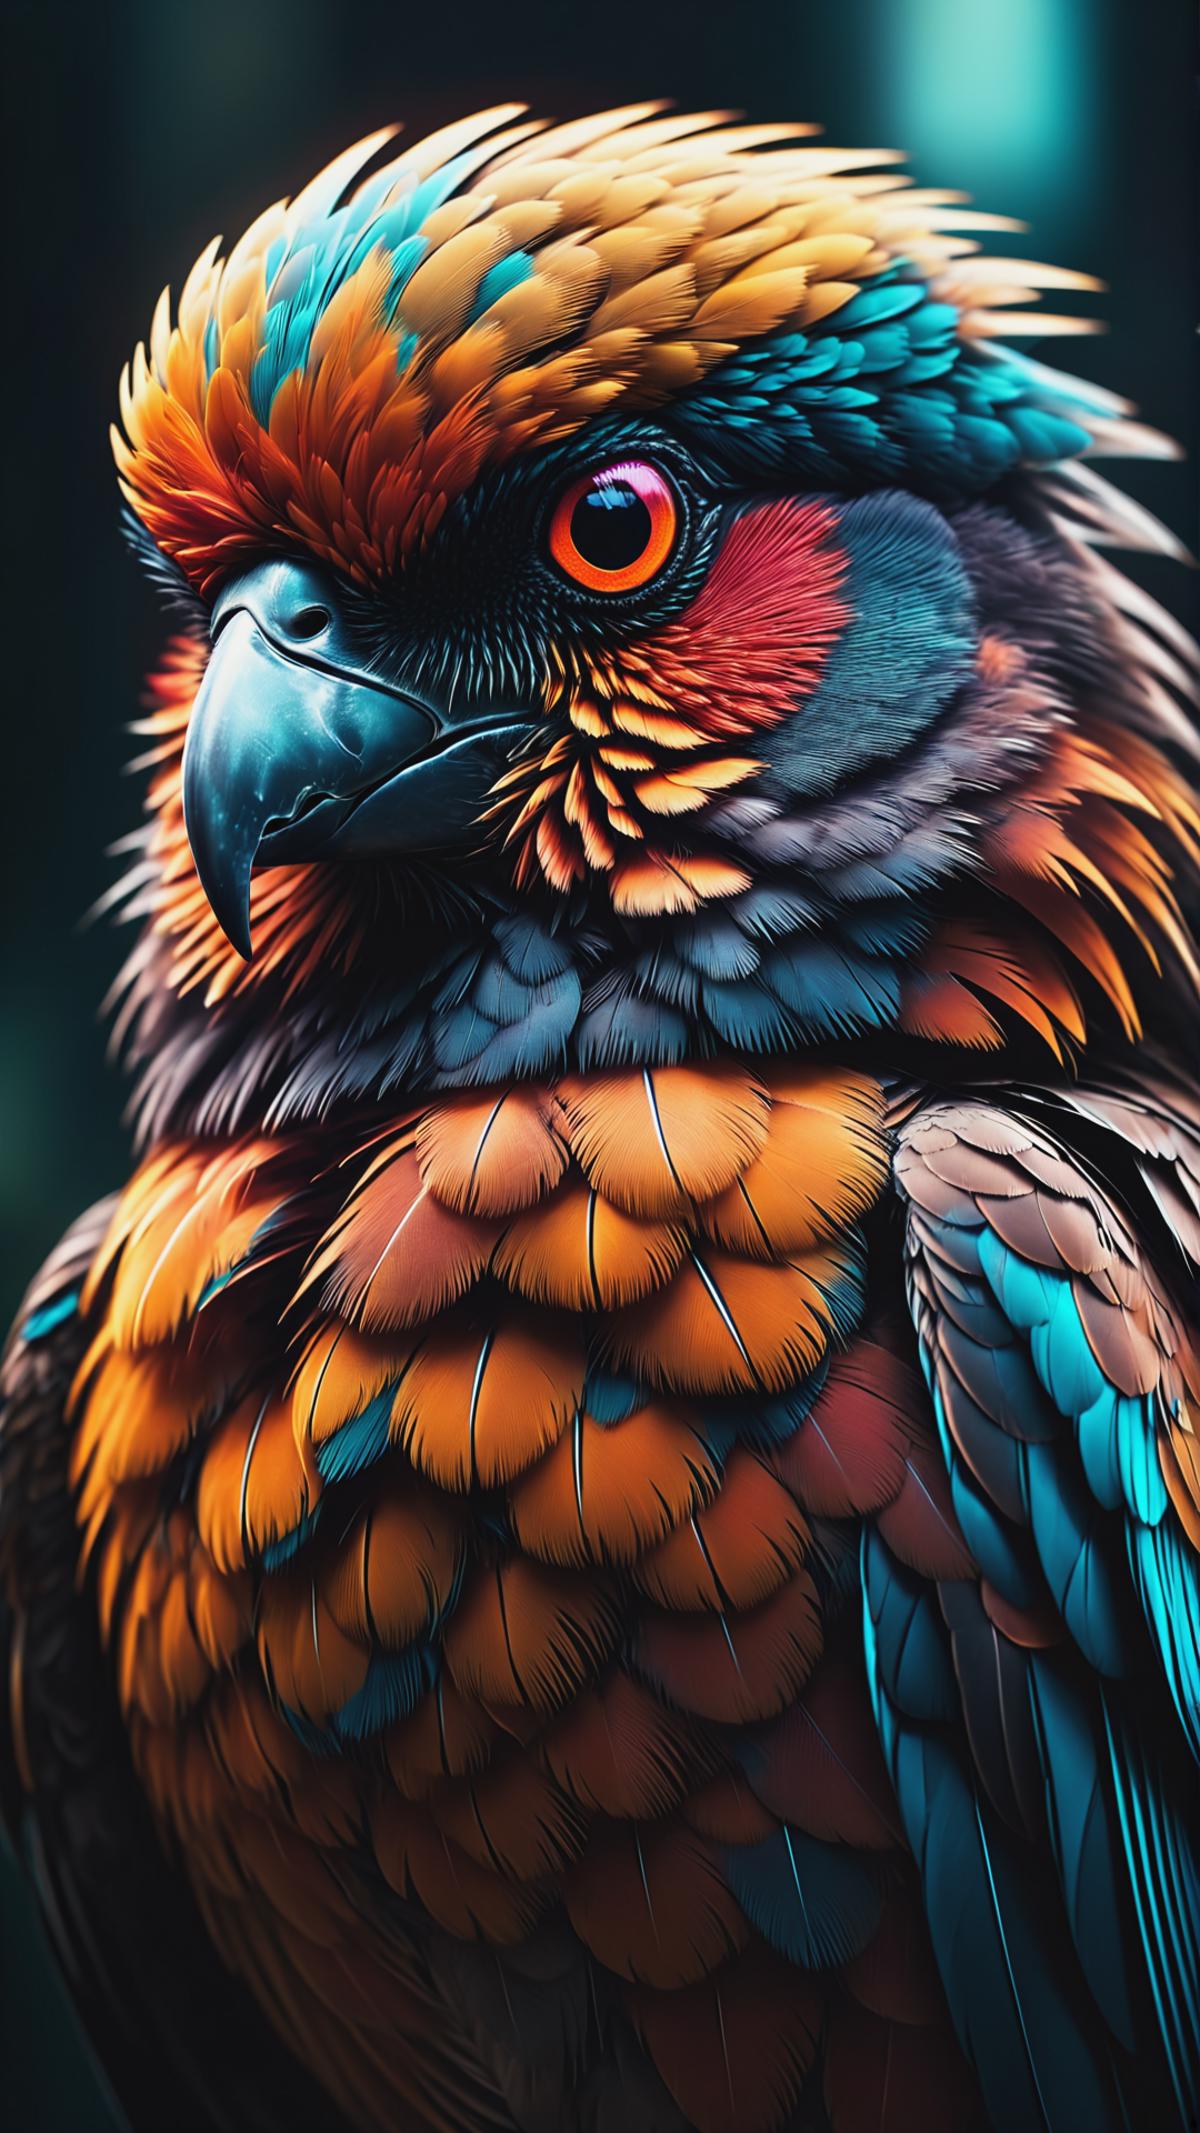 Vibrant Parrot with Red Beak and Orange Eyes, Up Close and in Focus.